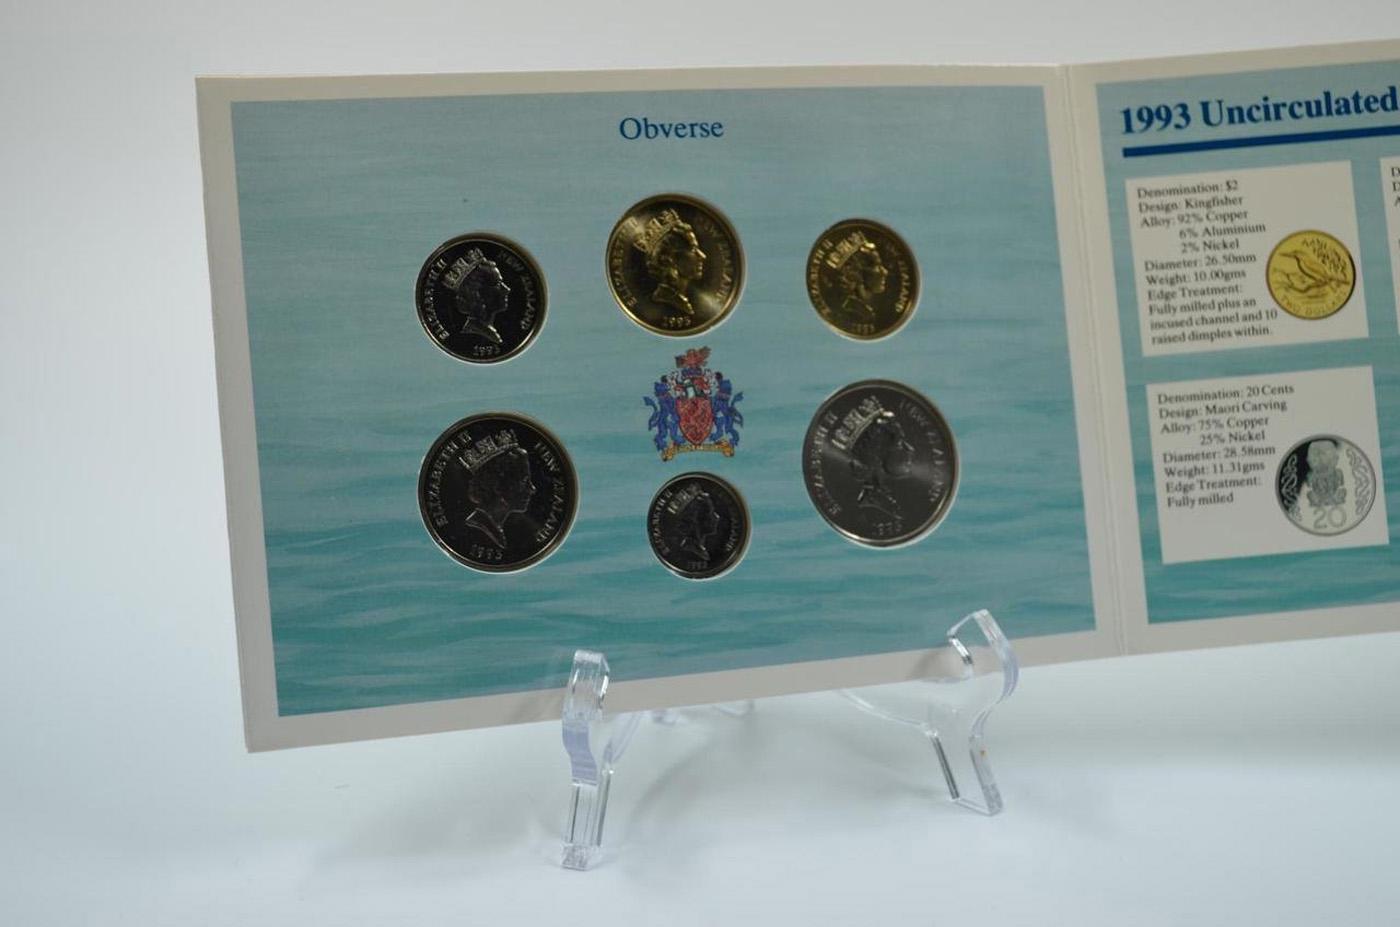 1993 Reserve Bank of New Zealand Uncirculated Coin Set, 6 Coins in Original Packaging